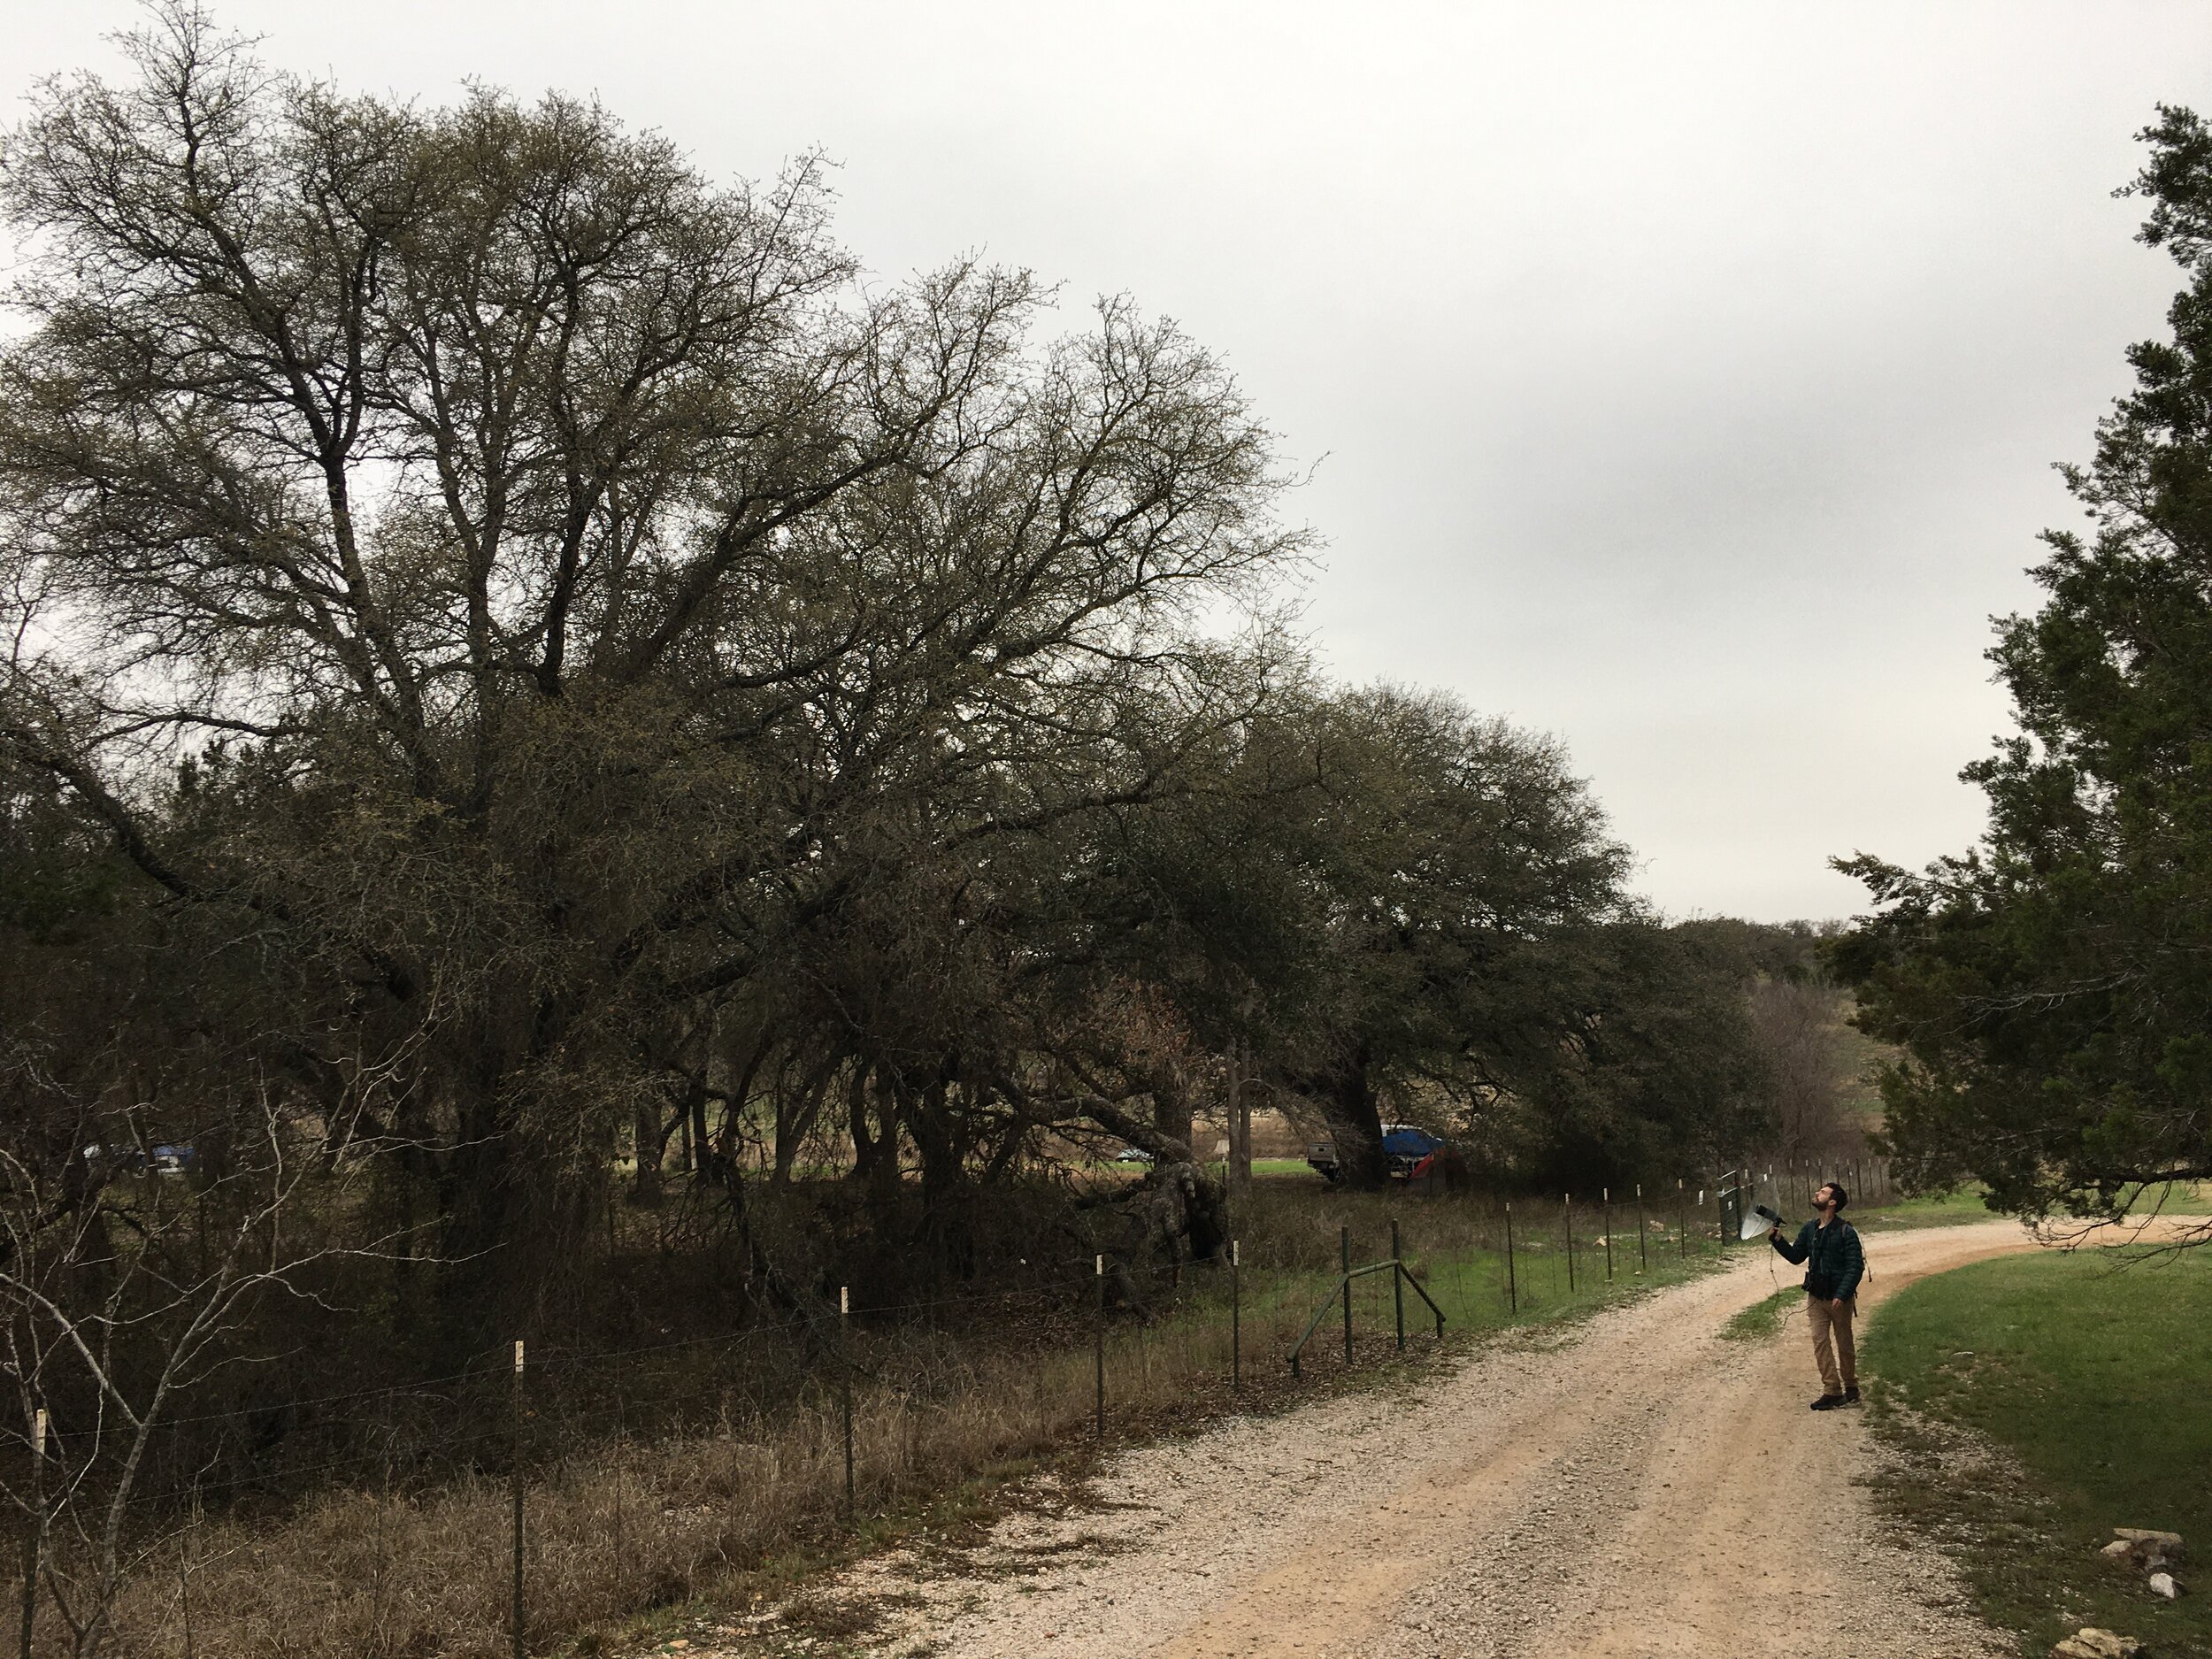 Zach Vickers recording Bewick's Wrens near Spicewood, Texas. March 2021